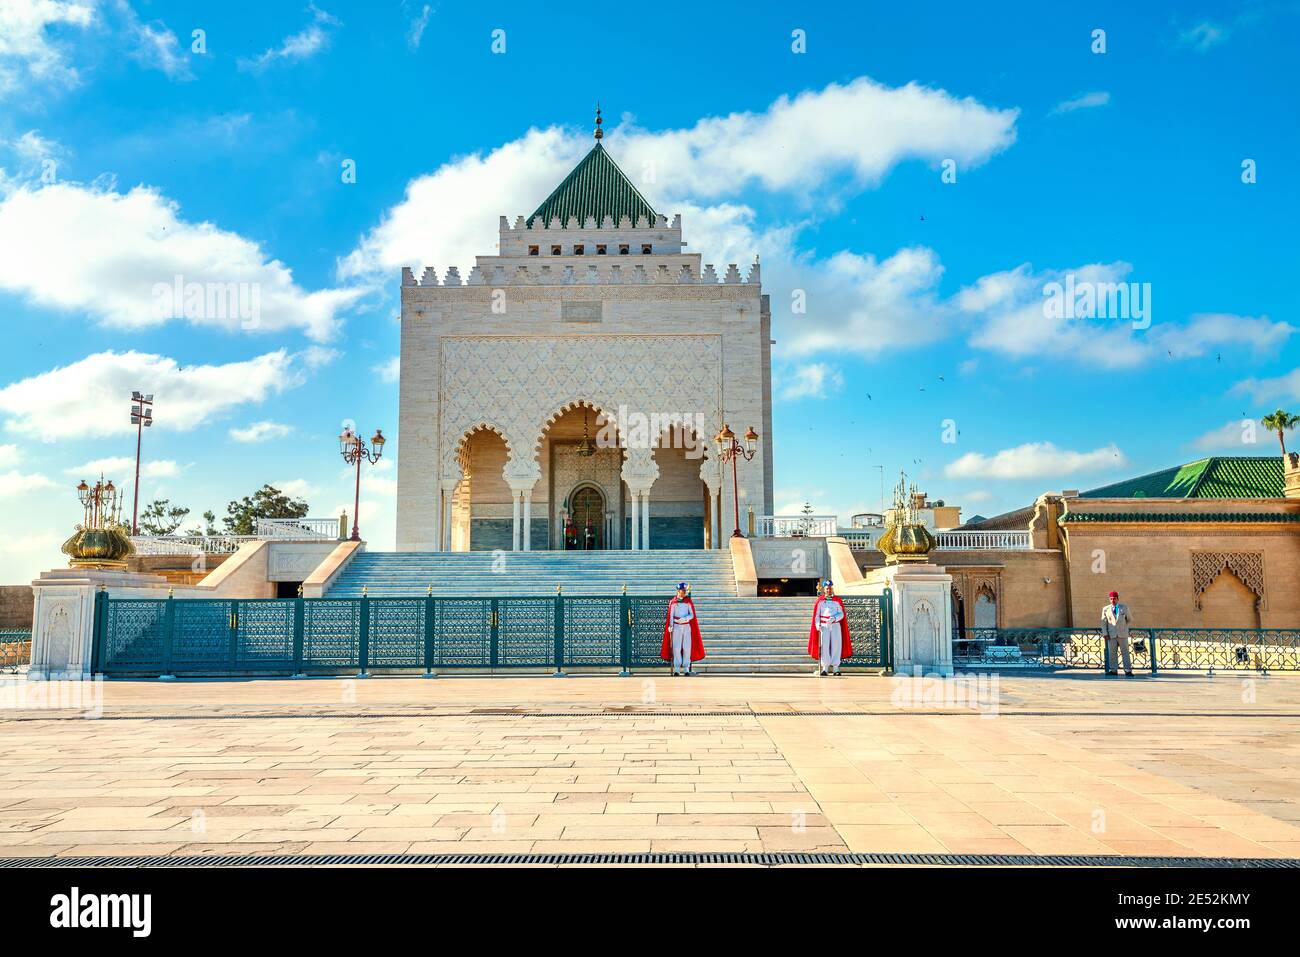 Mausoleum with guards at tomb of King Mohammed V in courtyard of incomplete Mosque. Rabat, Morocco, North Africa Stock Photo